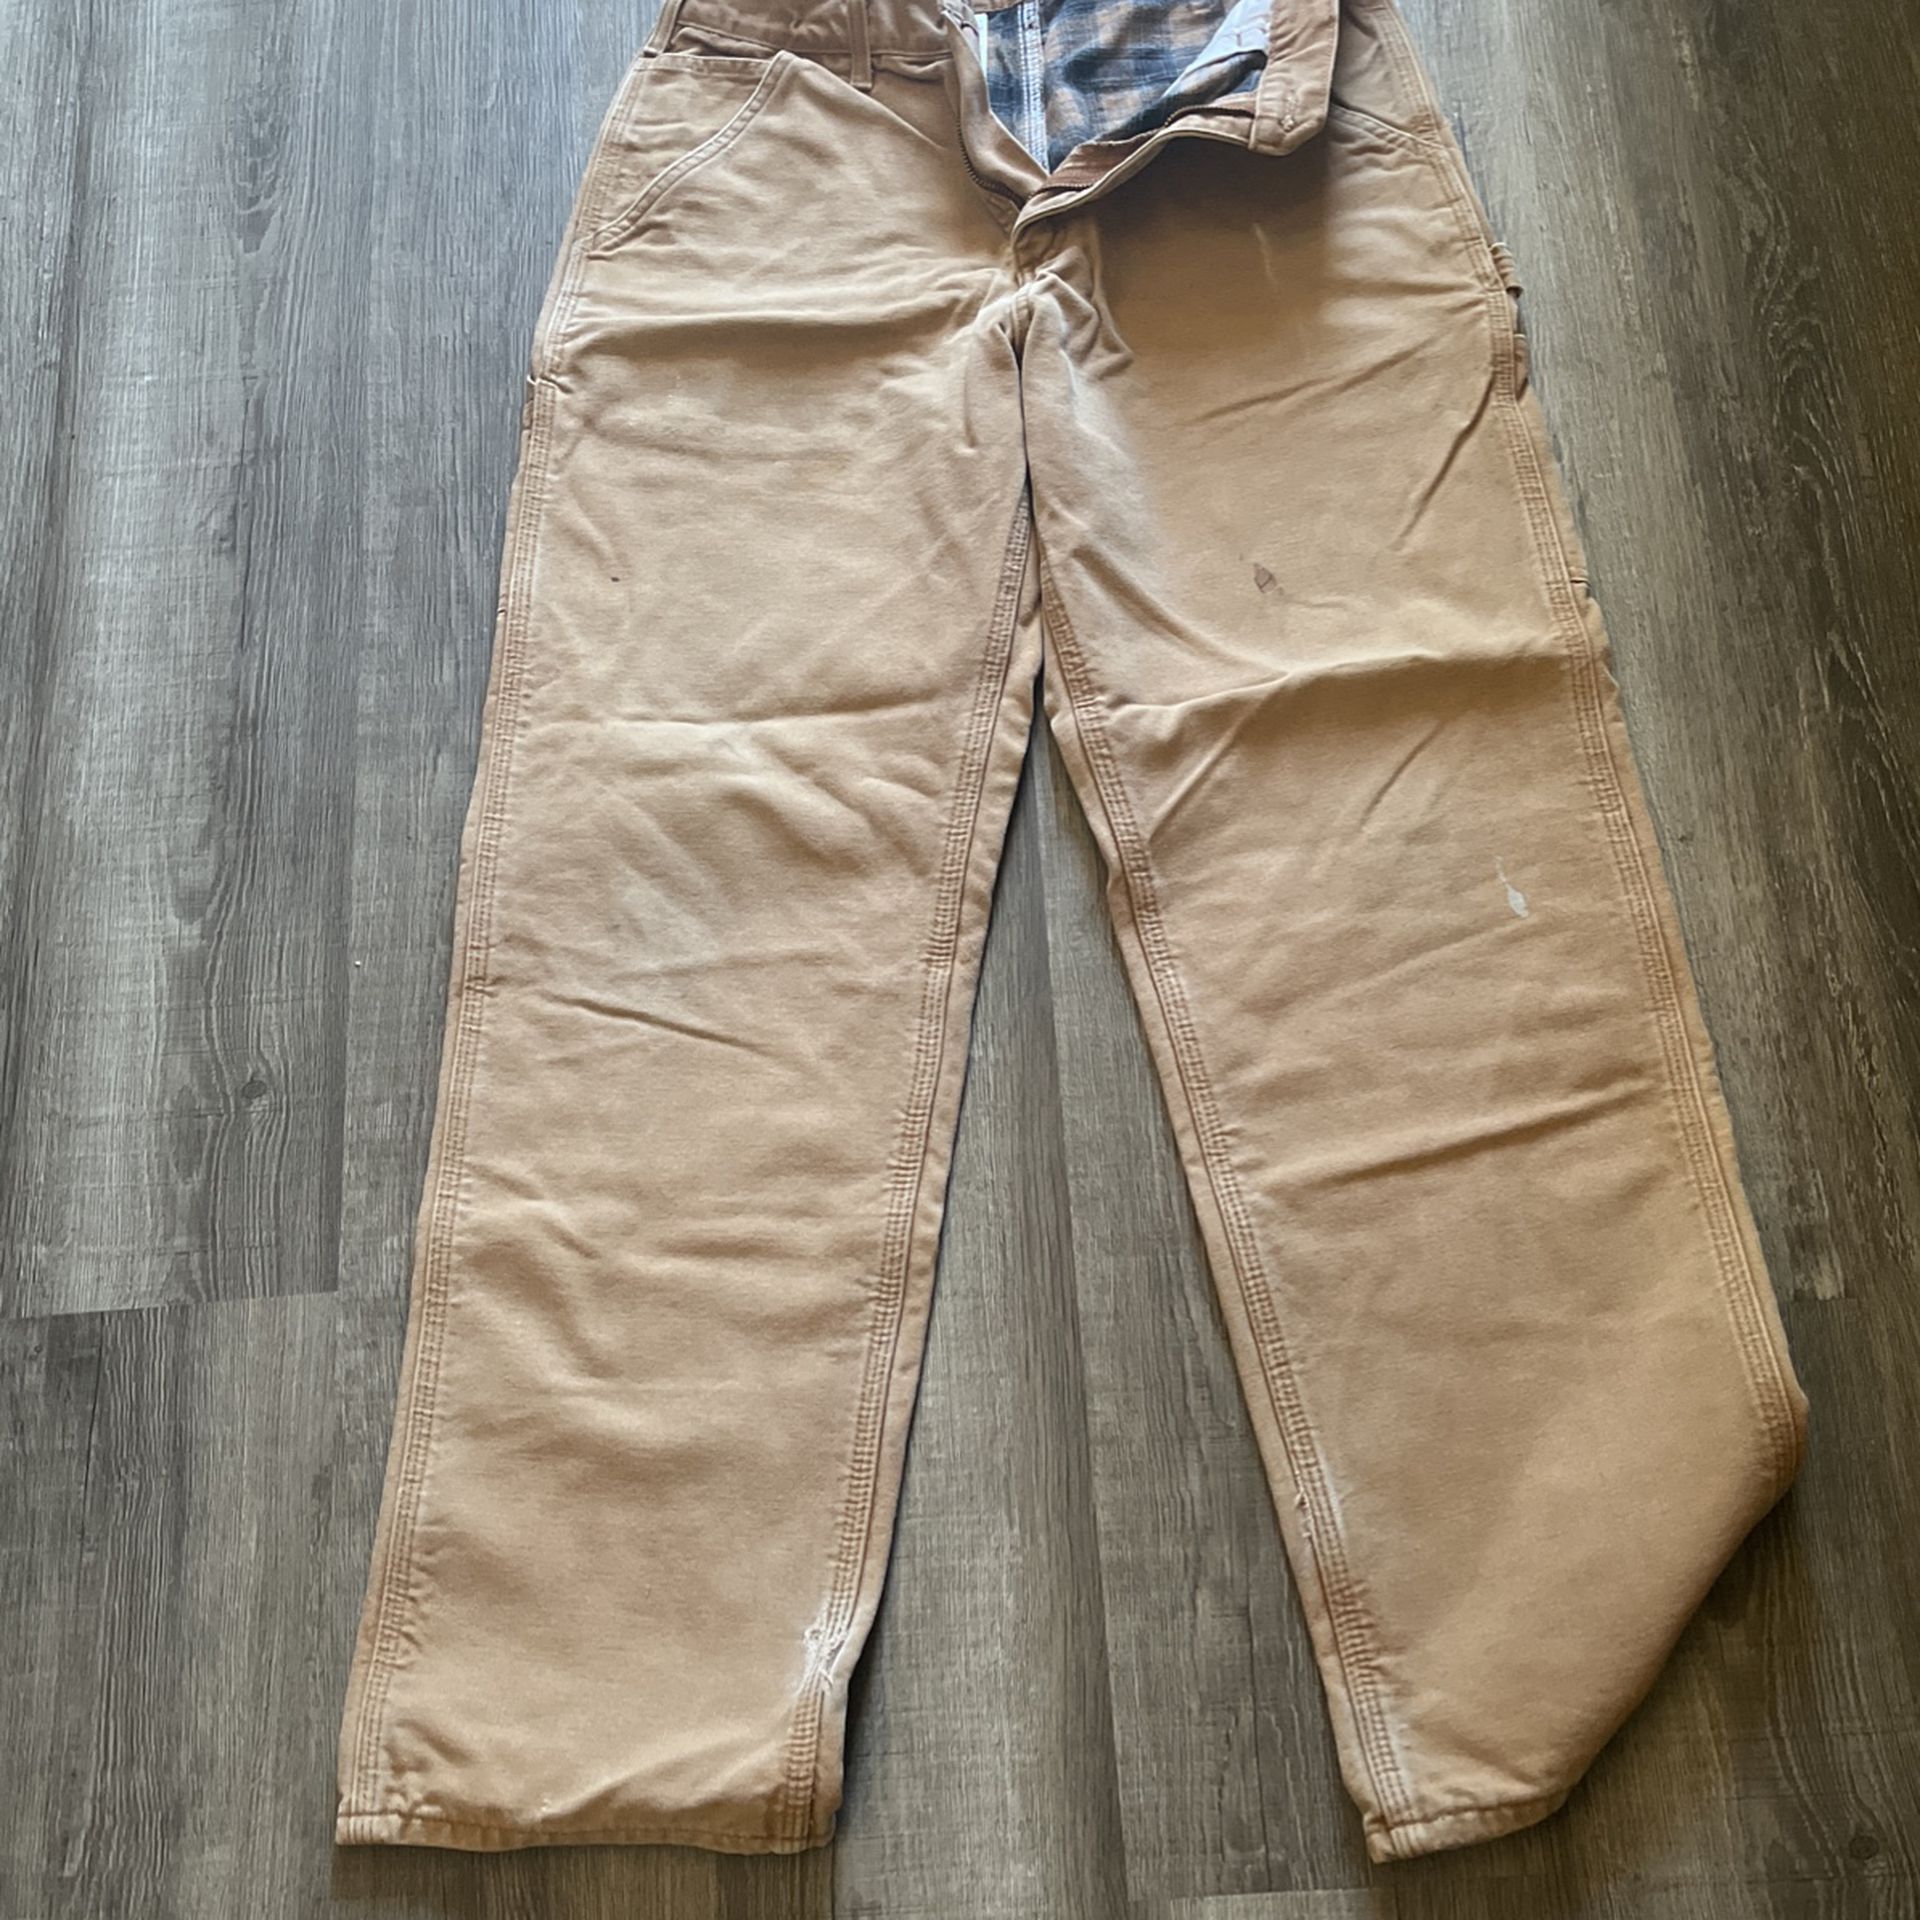 Carhartt Lined Pants 34x32 for Sale in Madison, ME - OfferUp